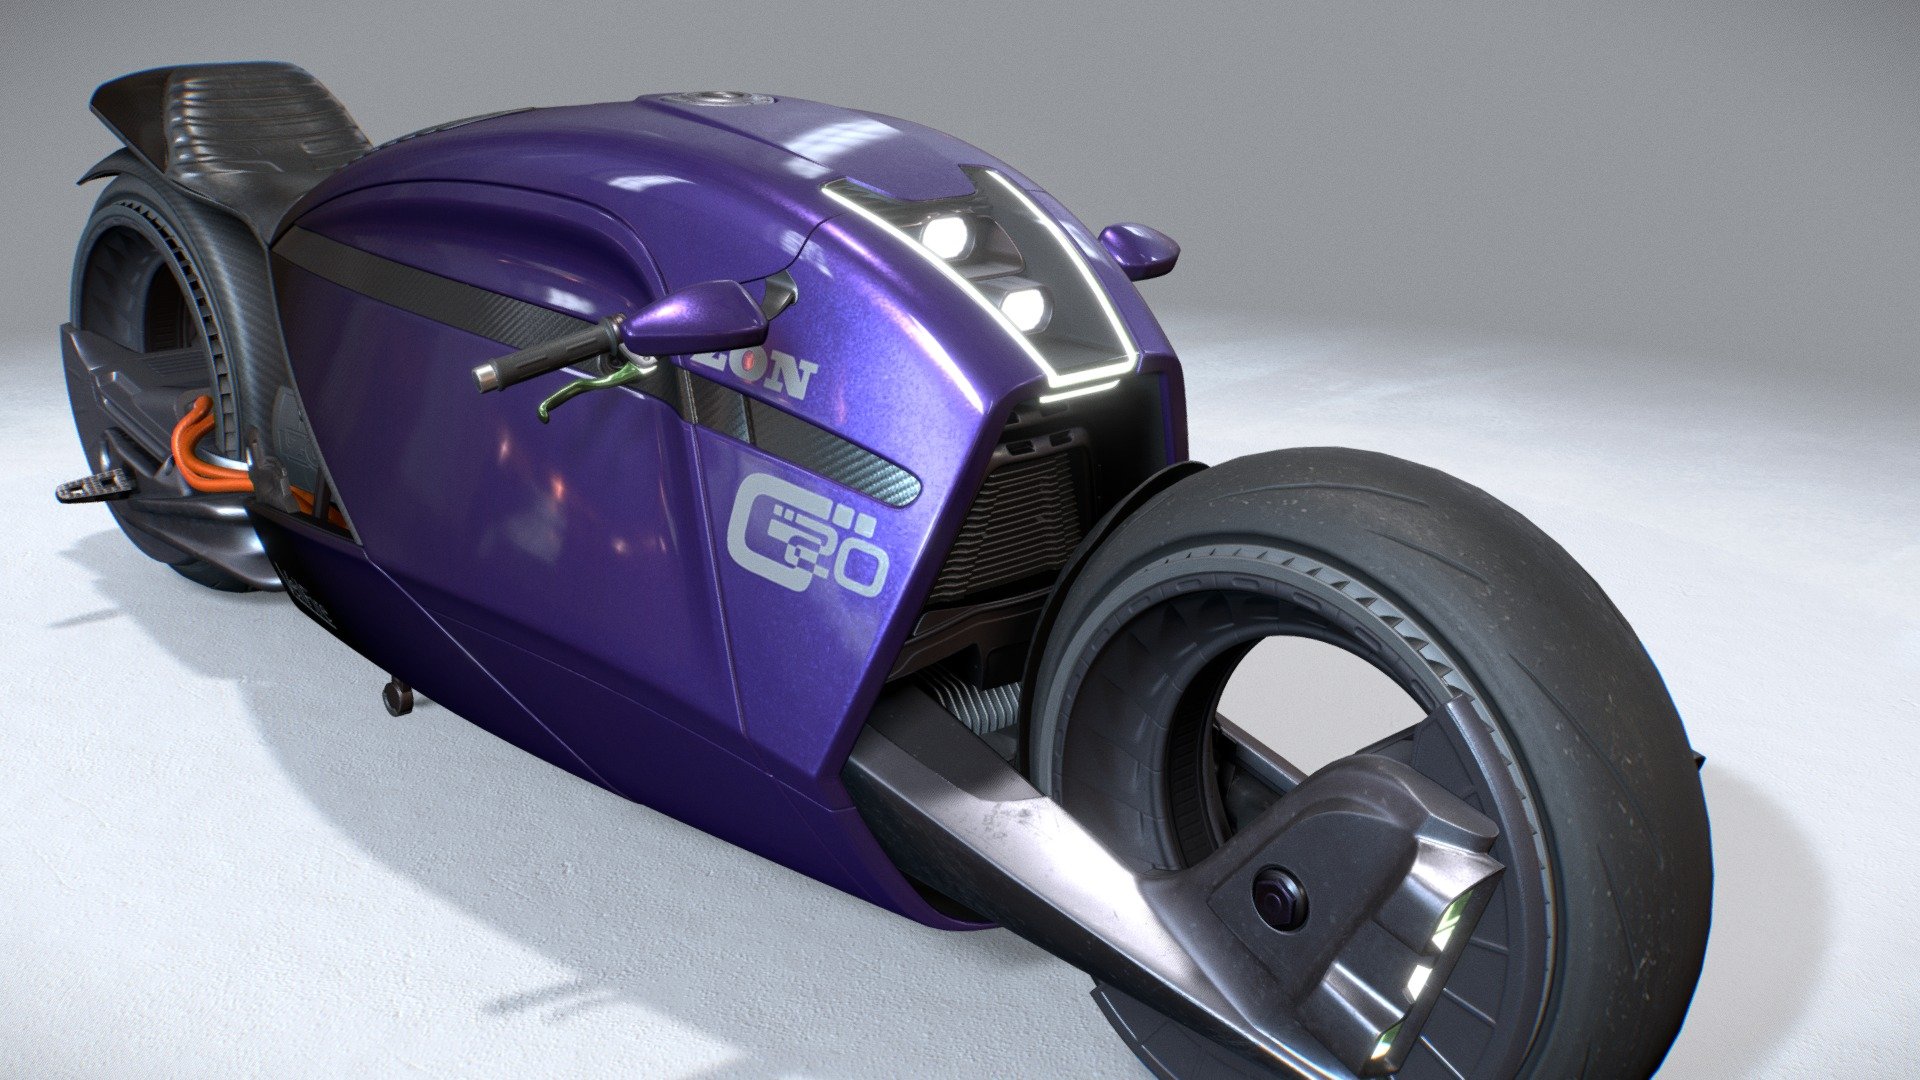 A sci-fi motorcycle with a strange electro-magnetic drivetrain. Based on a concept drawing https://imgur.com/nA6gNS2 by a friend of mine https://www.artstation.com/gavinmanners.

Created using 3dsMax and Substance 3D Painter. Most of the components have normal maps baked into them but the bodywork has a normal map only for the flakes and the carbon fiber effect 3d model